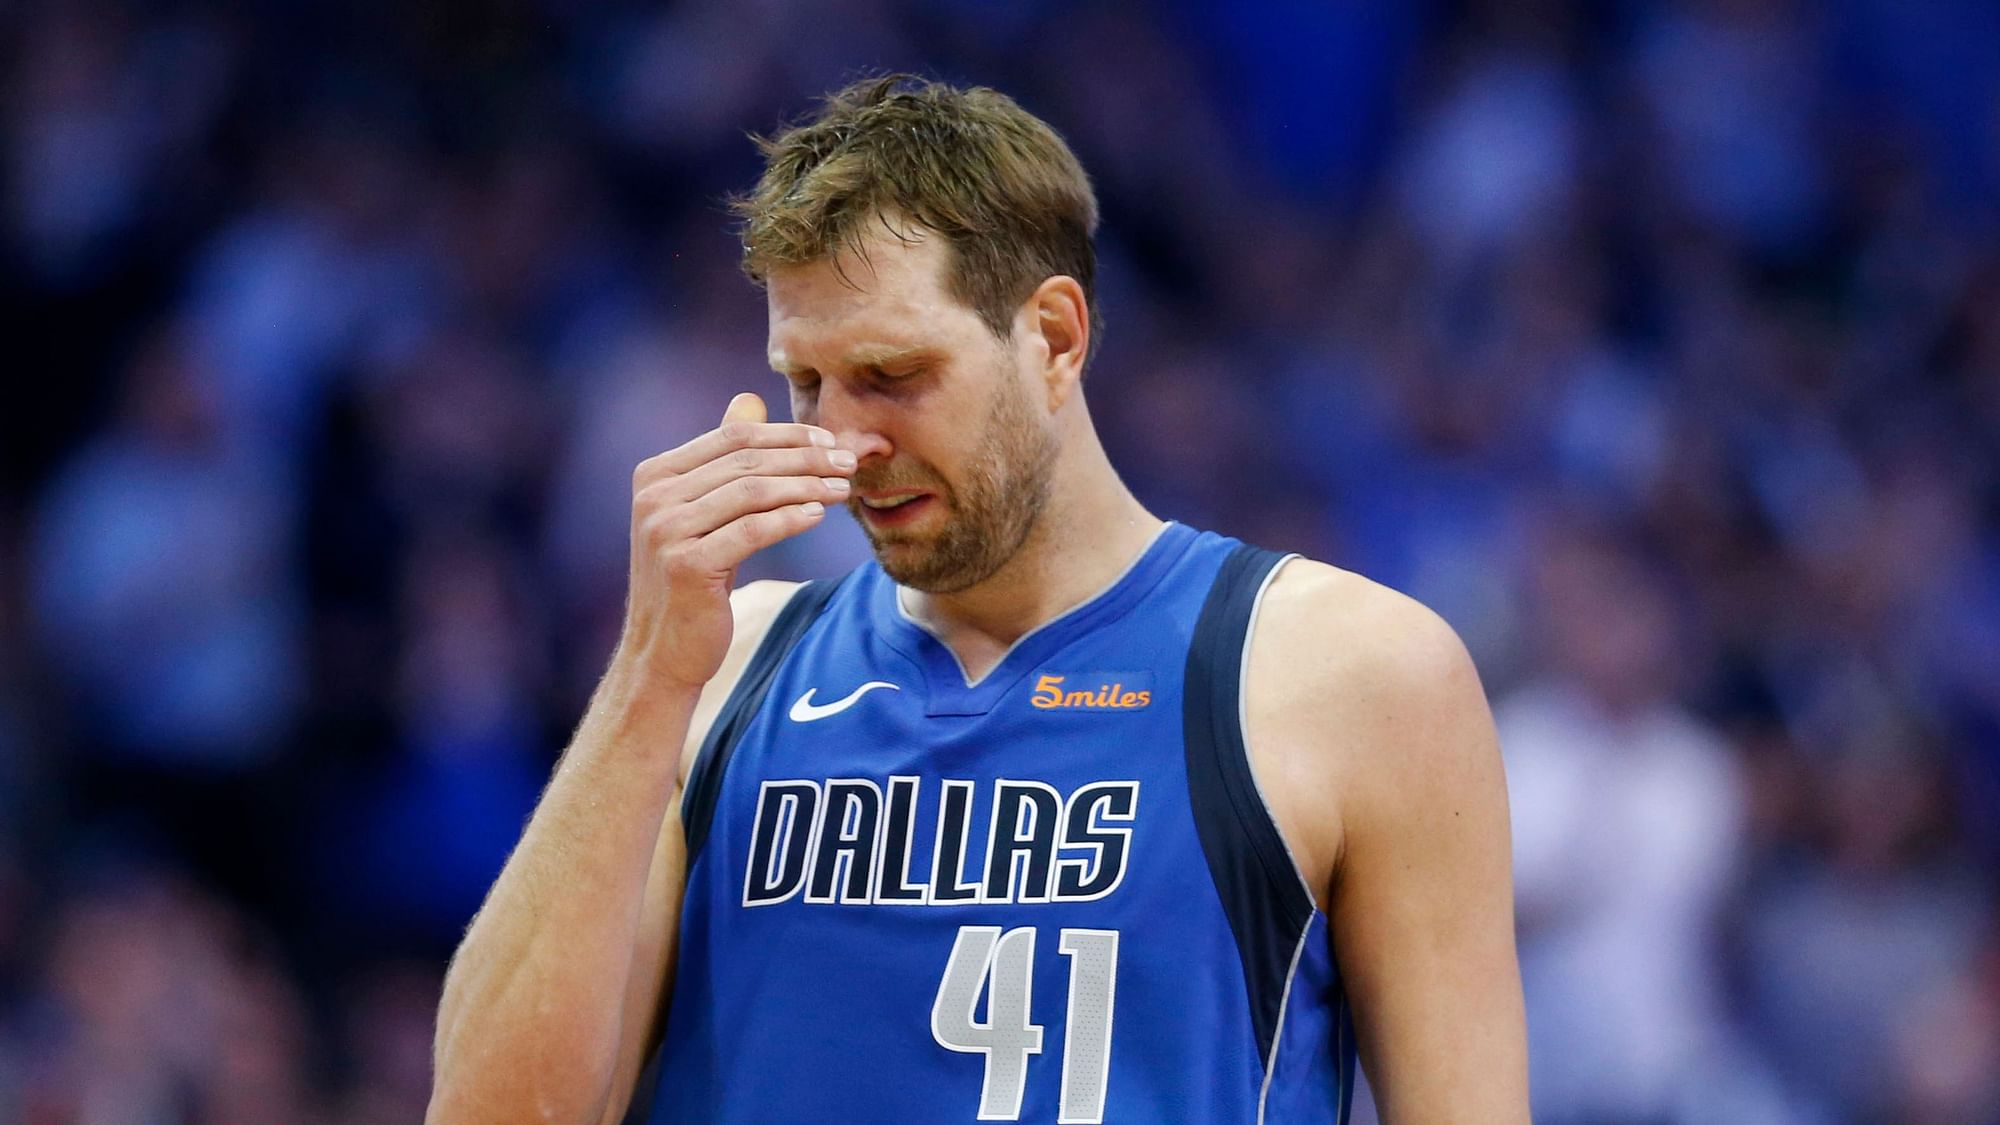 Dirk Nowitzki cried near midcourt when the second quarter was about to resume.